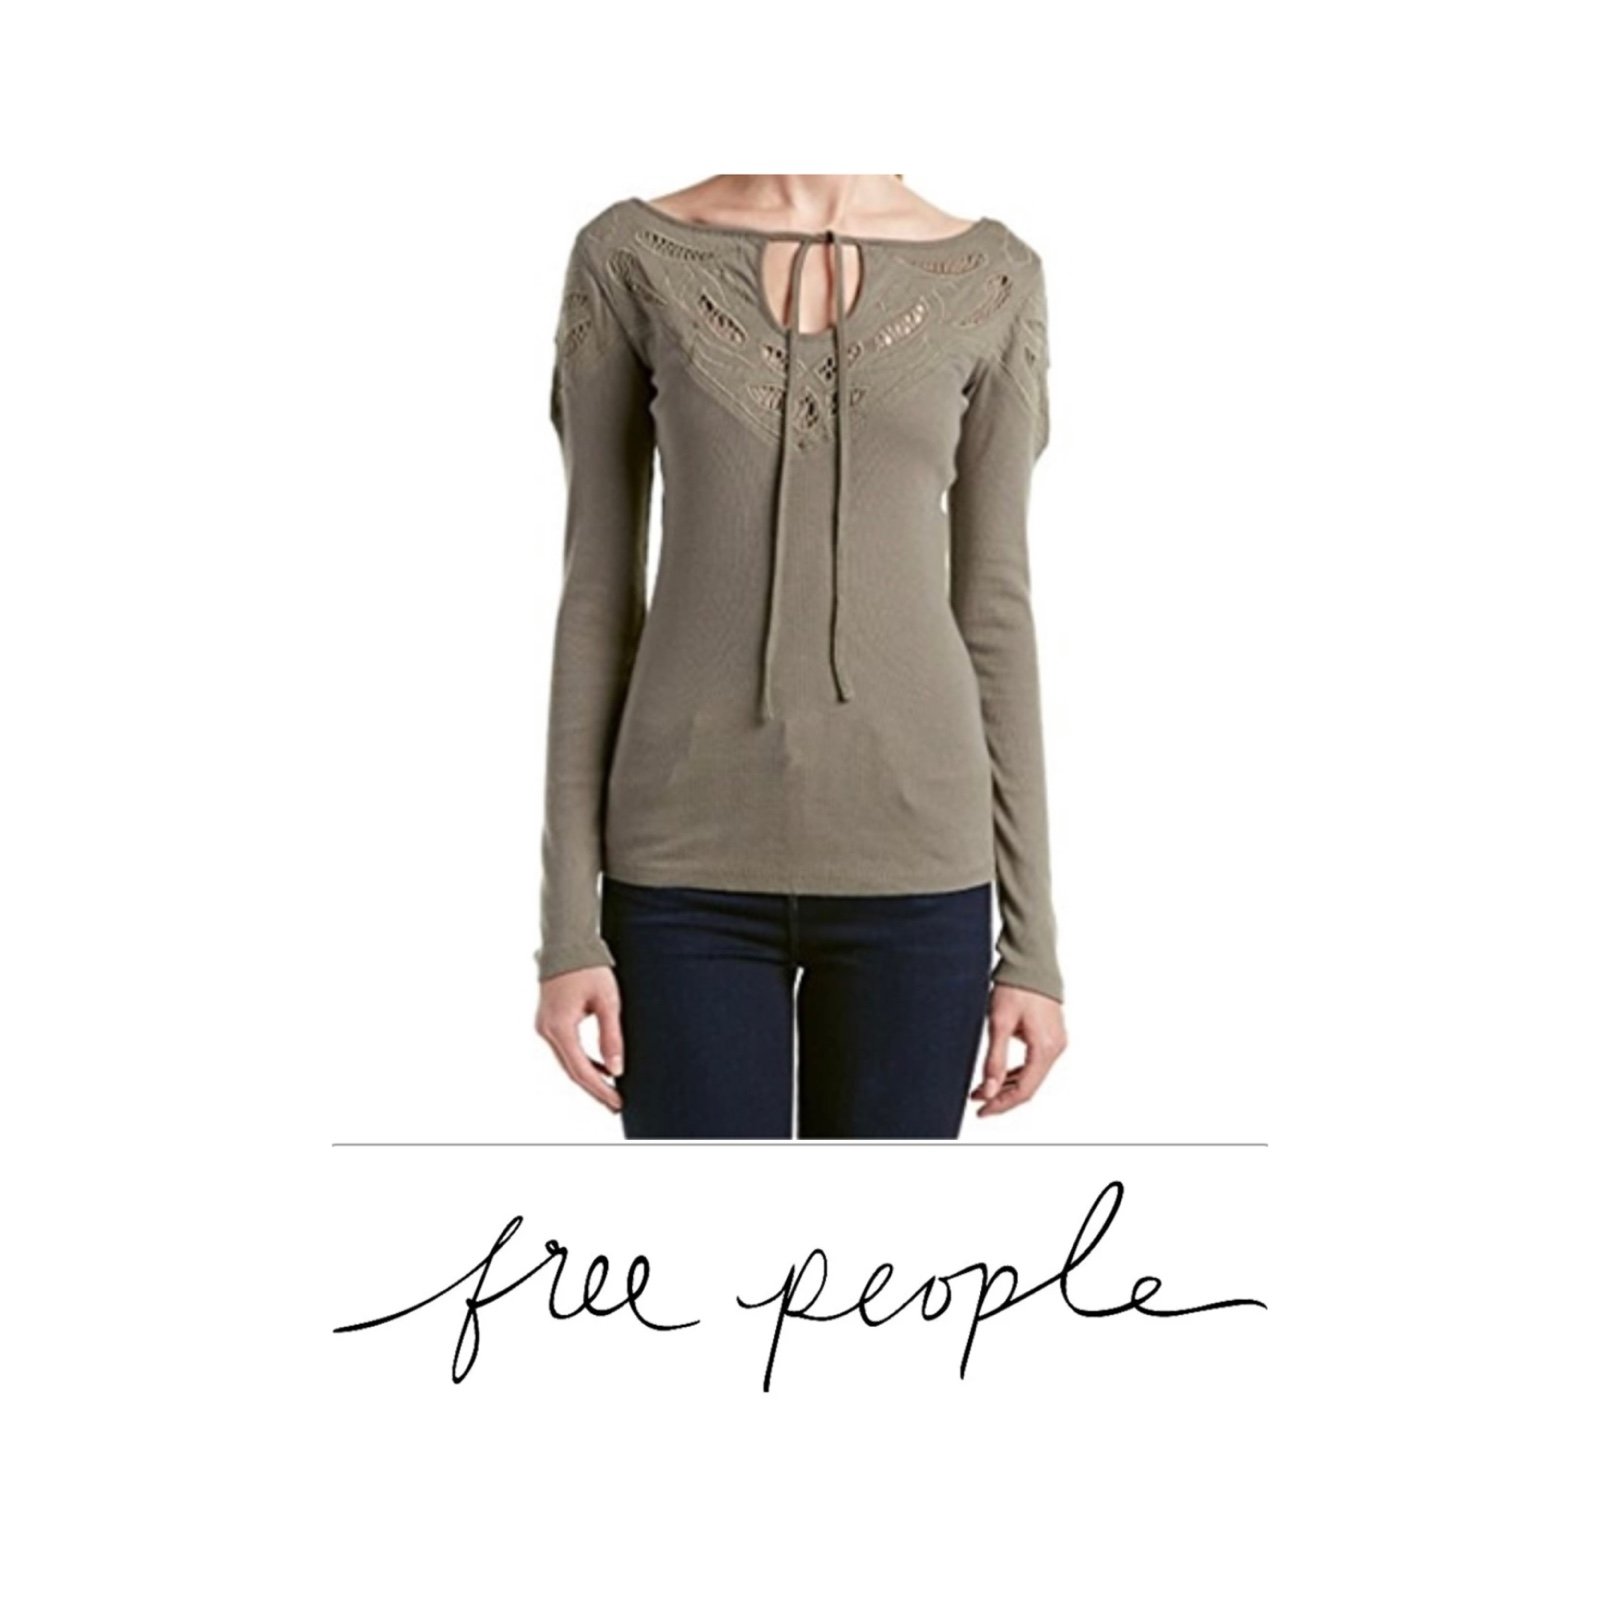 Nice Free People crochet knit top in olive green L8xFG8I5F US Outlet